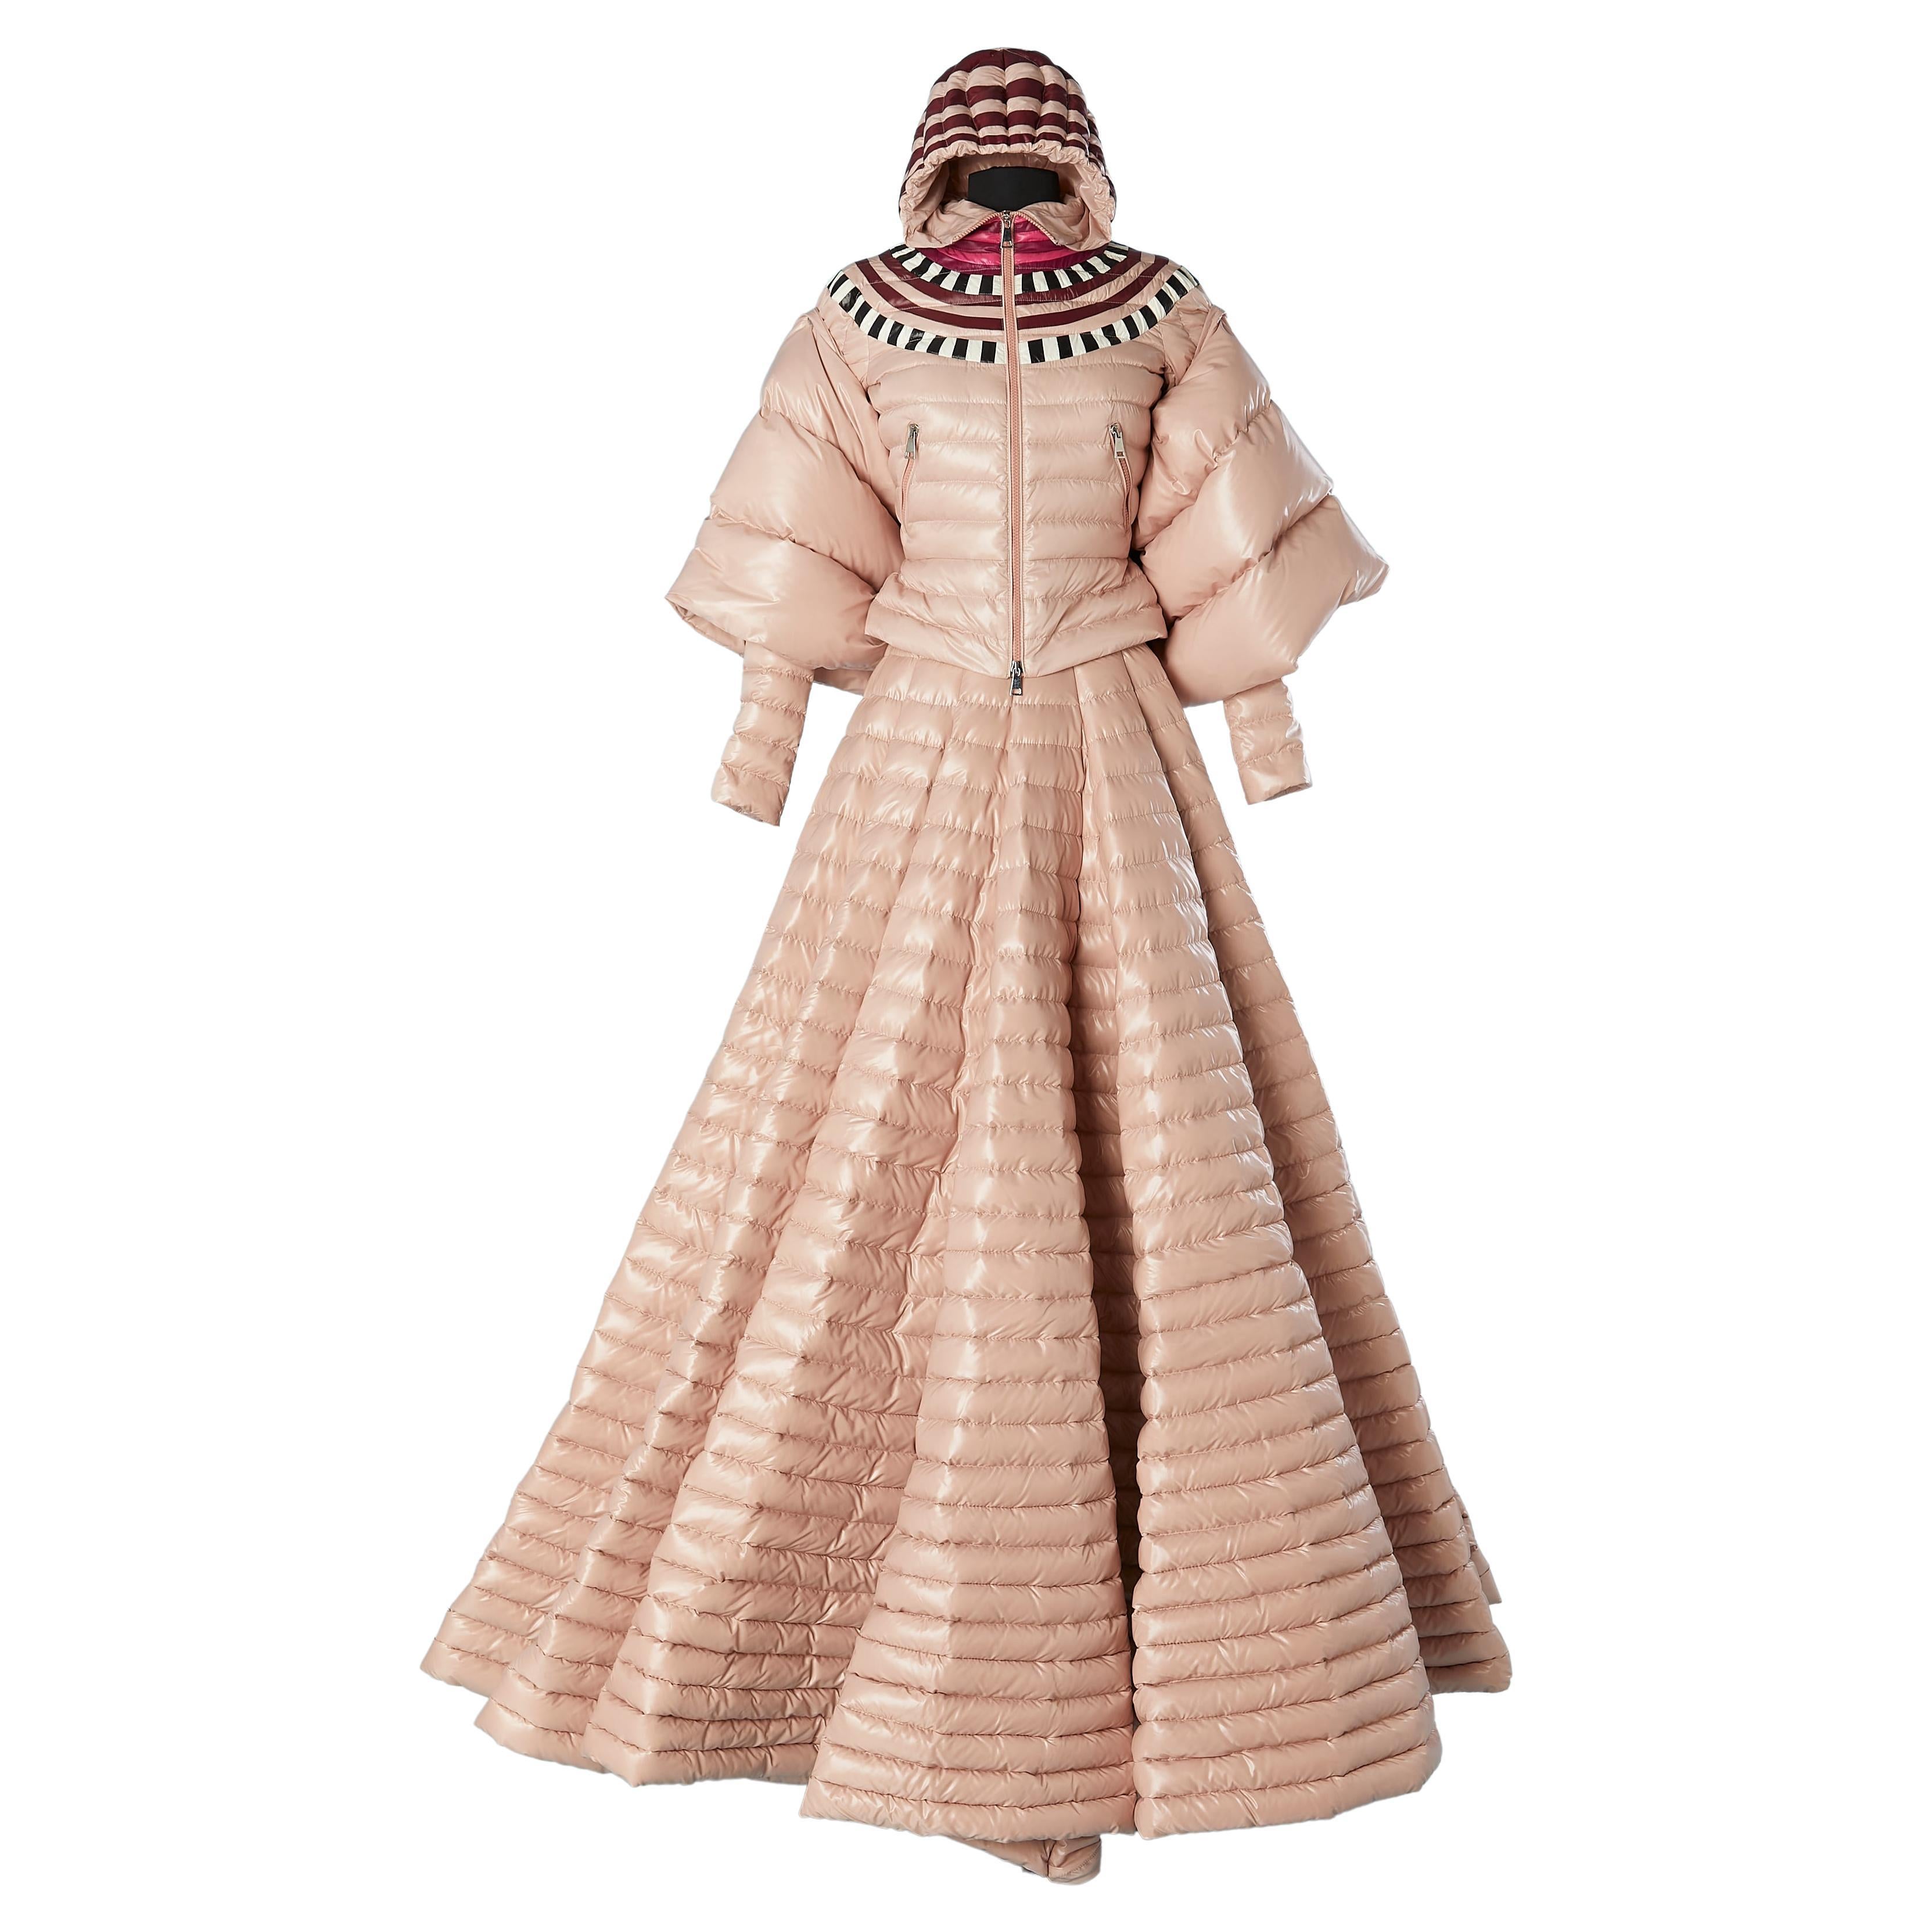 Goose down jacket, cape and crinoline skirt Moncler Genius by Pierpaolo Piccioli For Sale